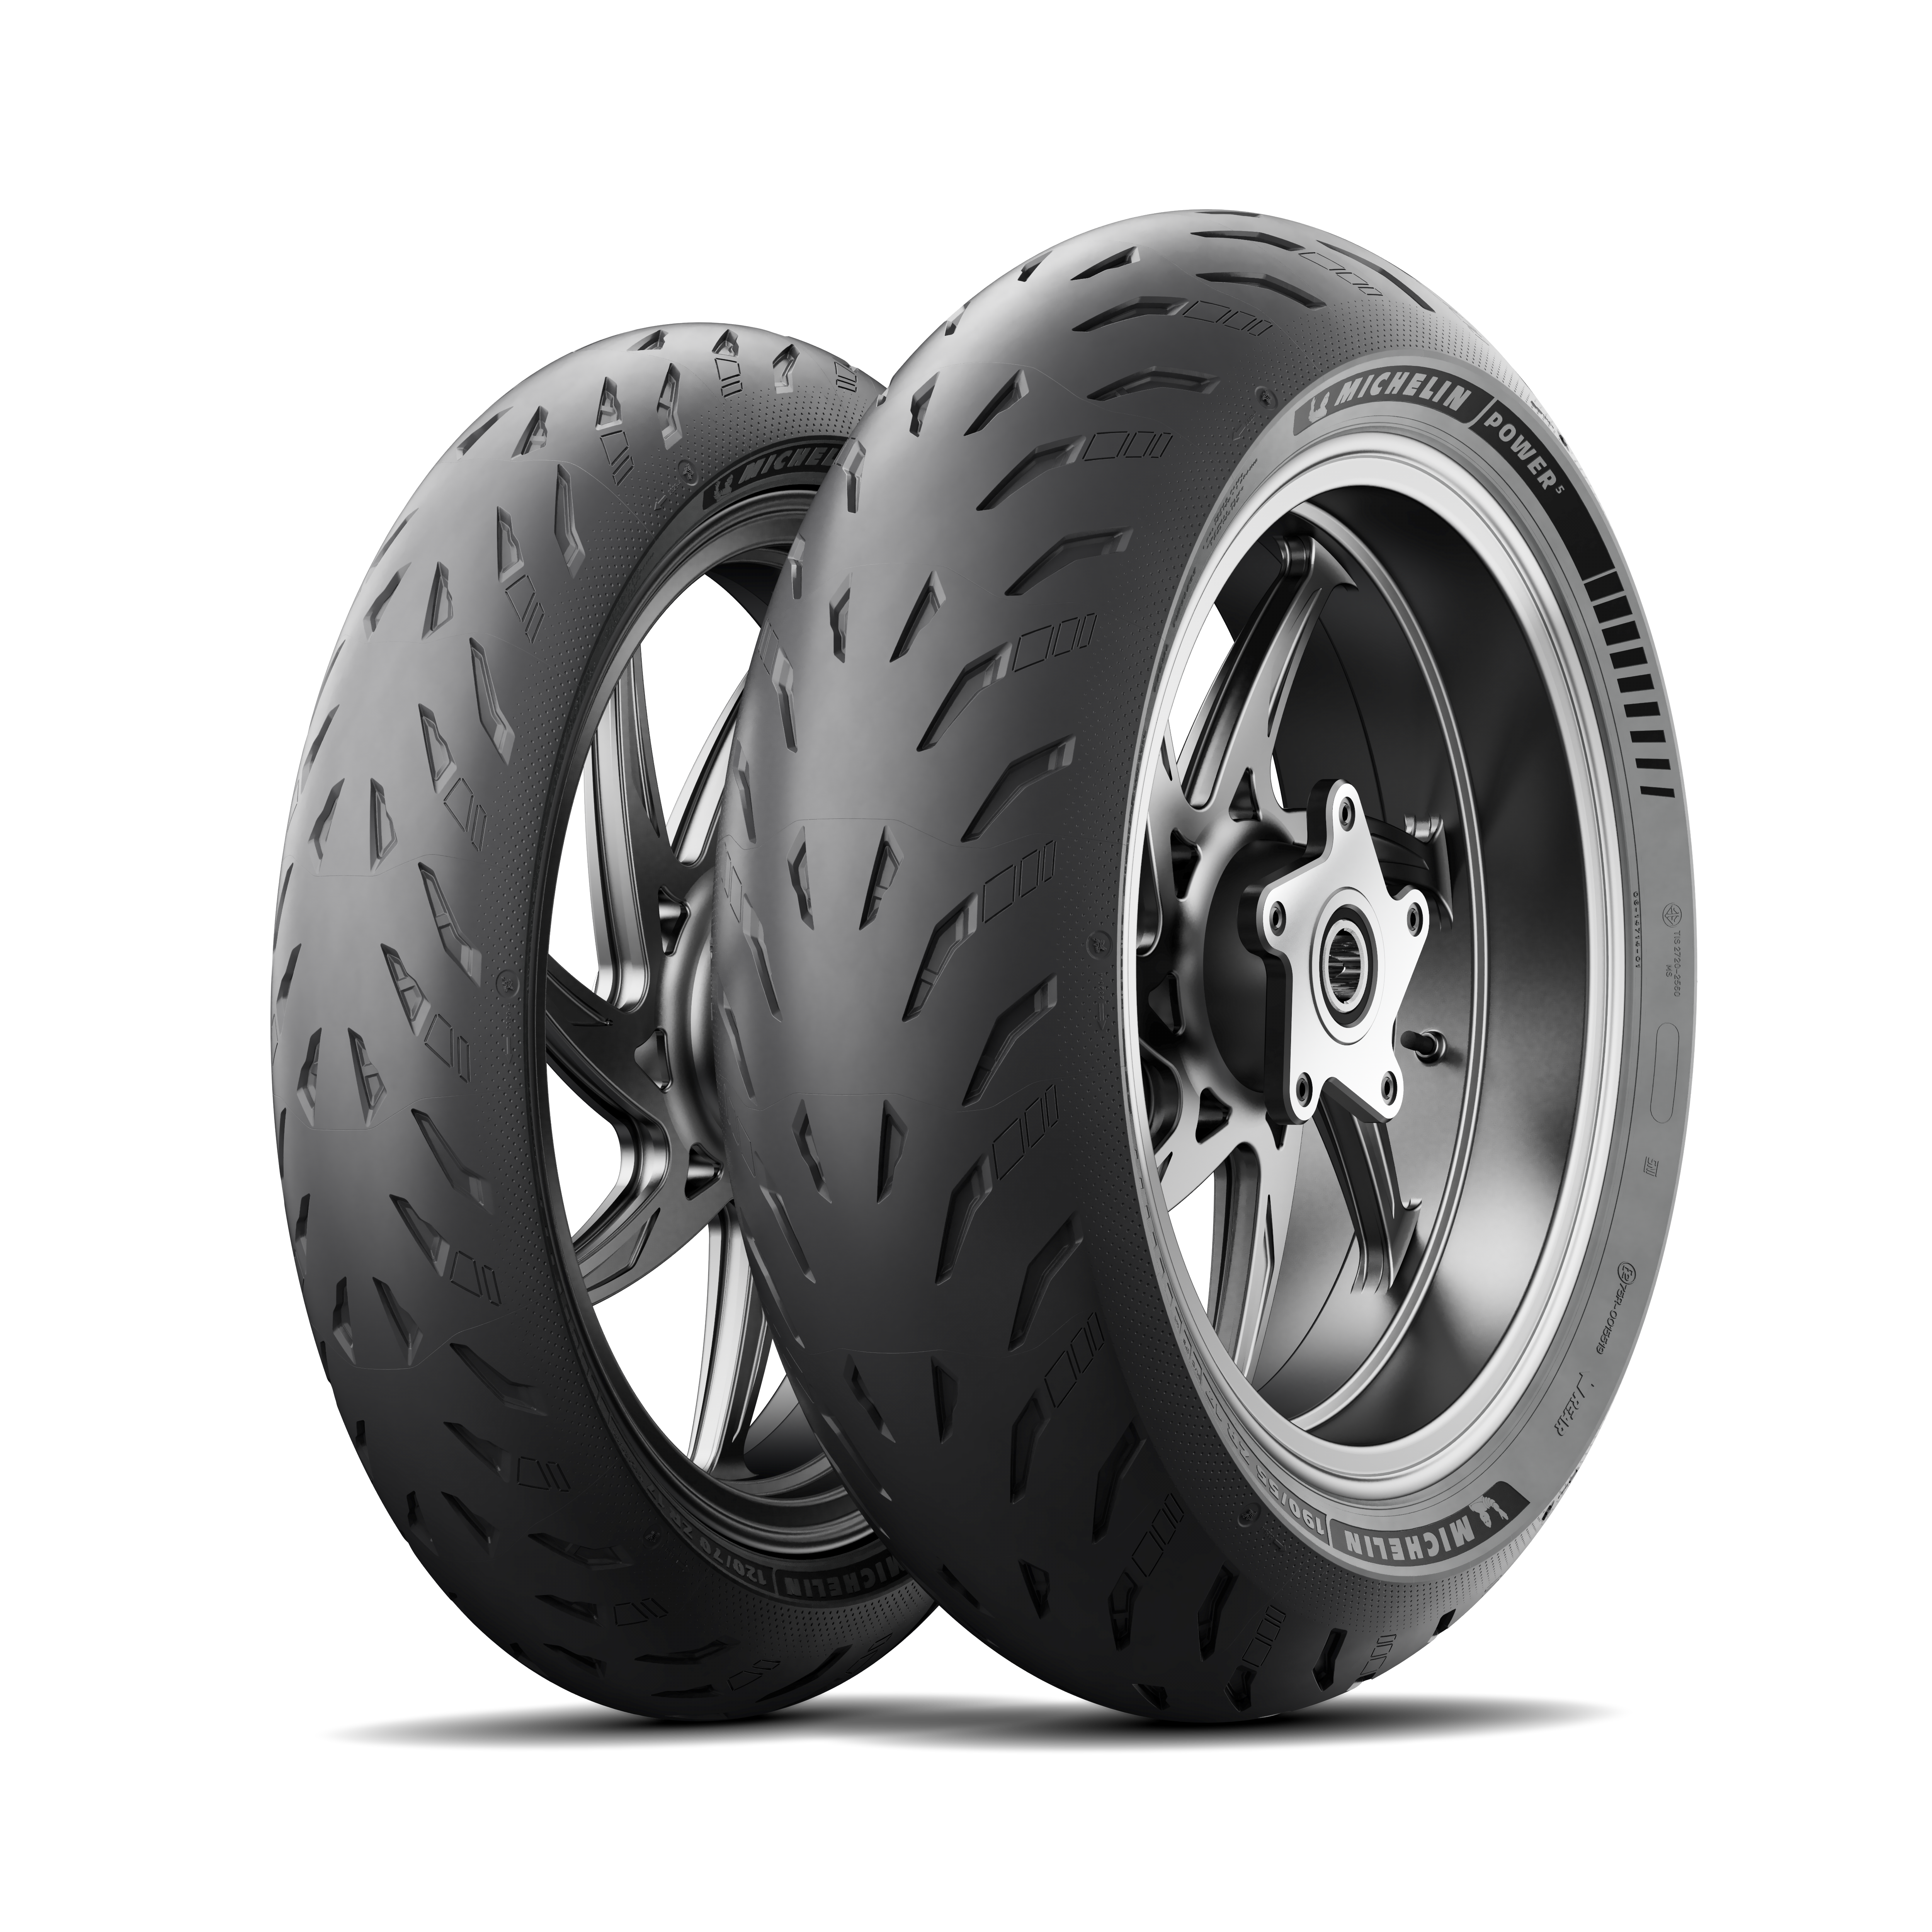 MICHELIN POWER 5 - Motorcycle Tire | MICHELIN USA